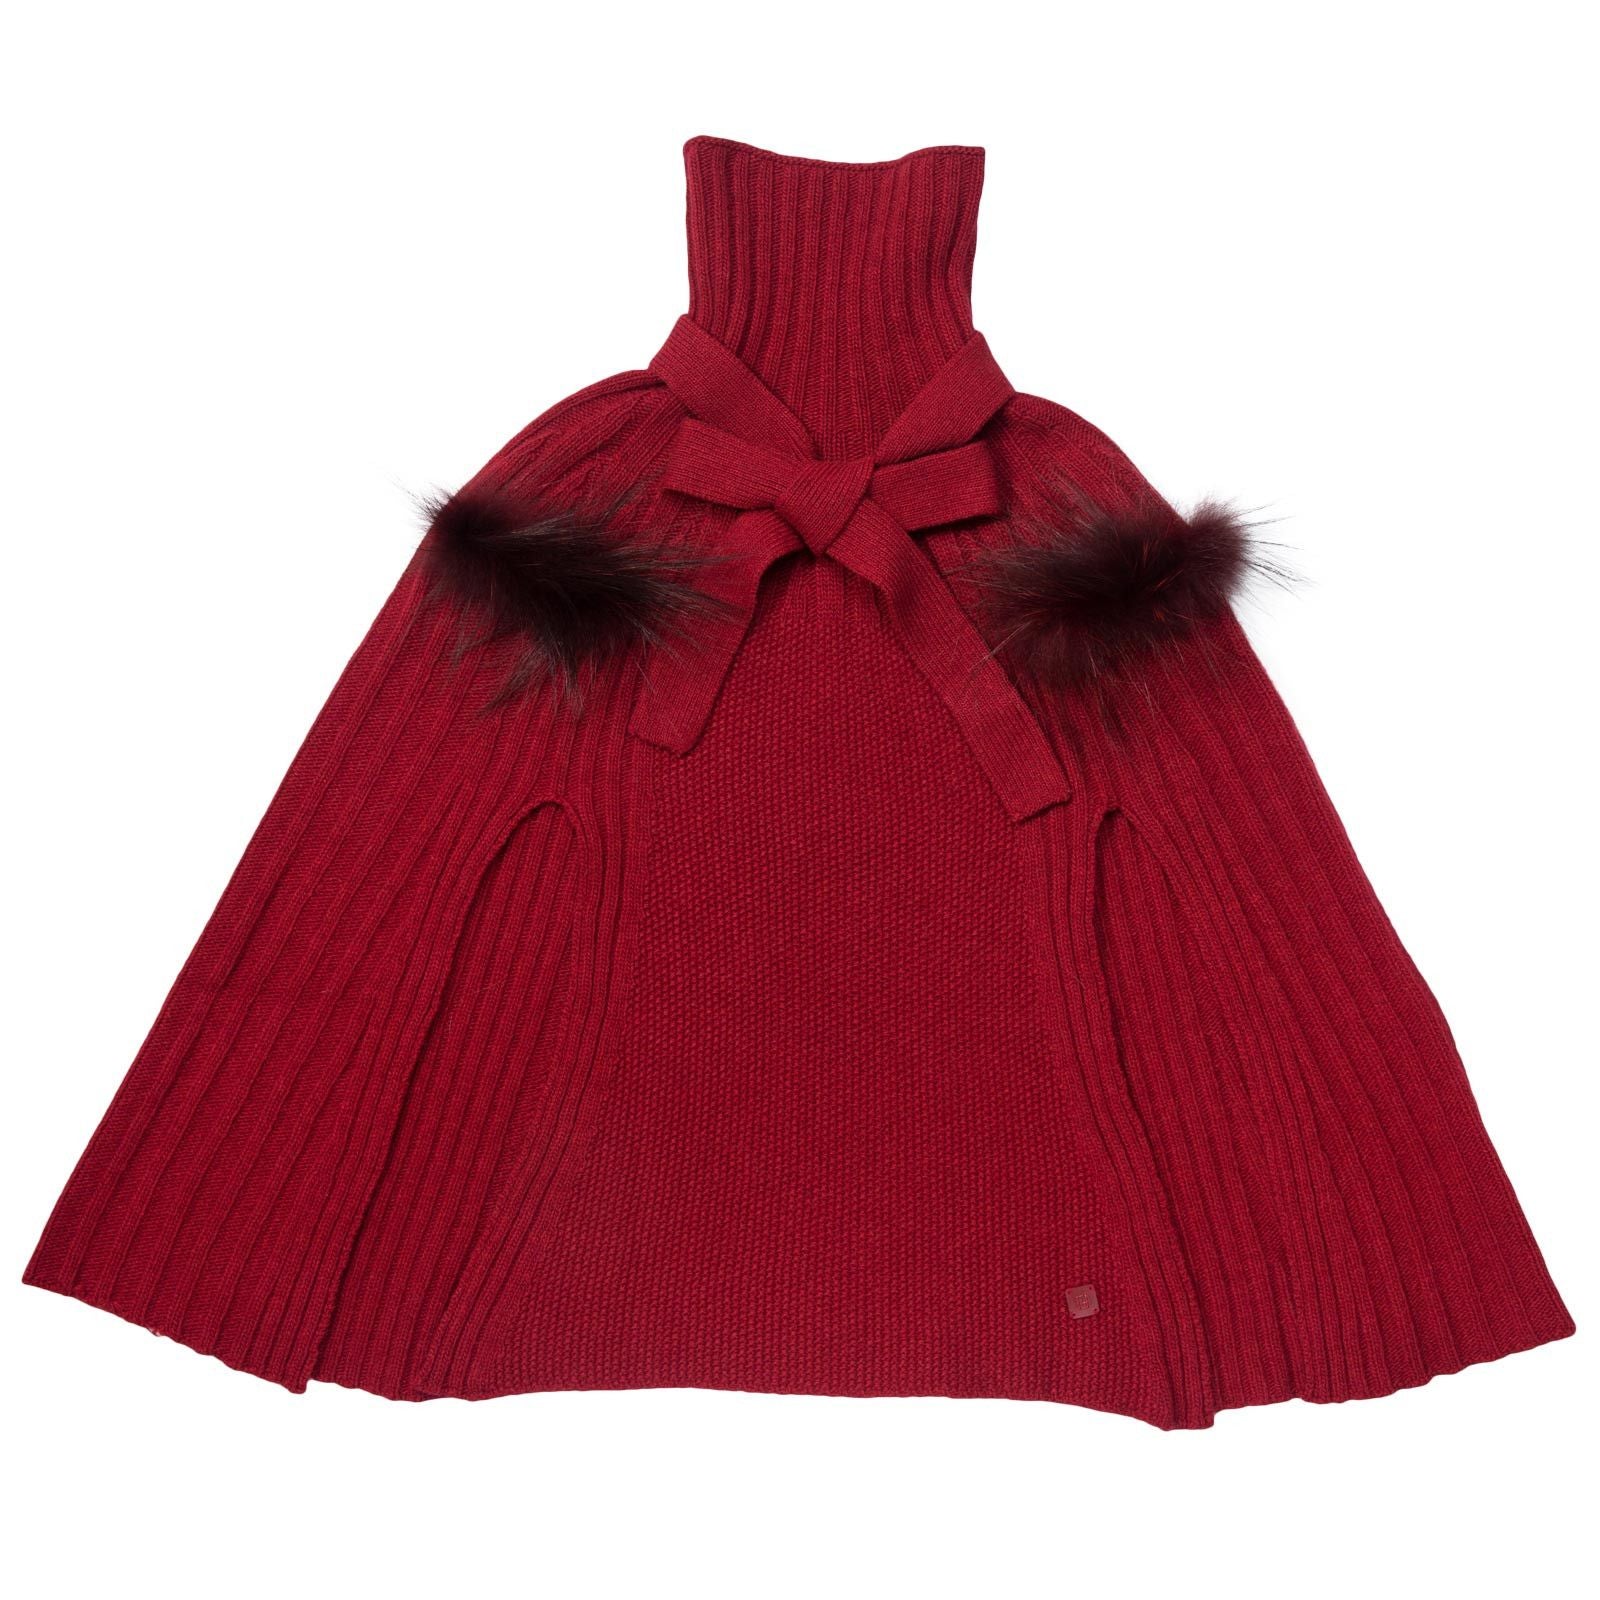 Girls Red Knitted Poncho With Fur Trims - CÉMAROSE | Children's Fashion Store - 3